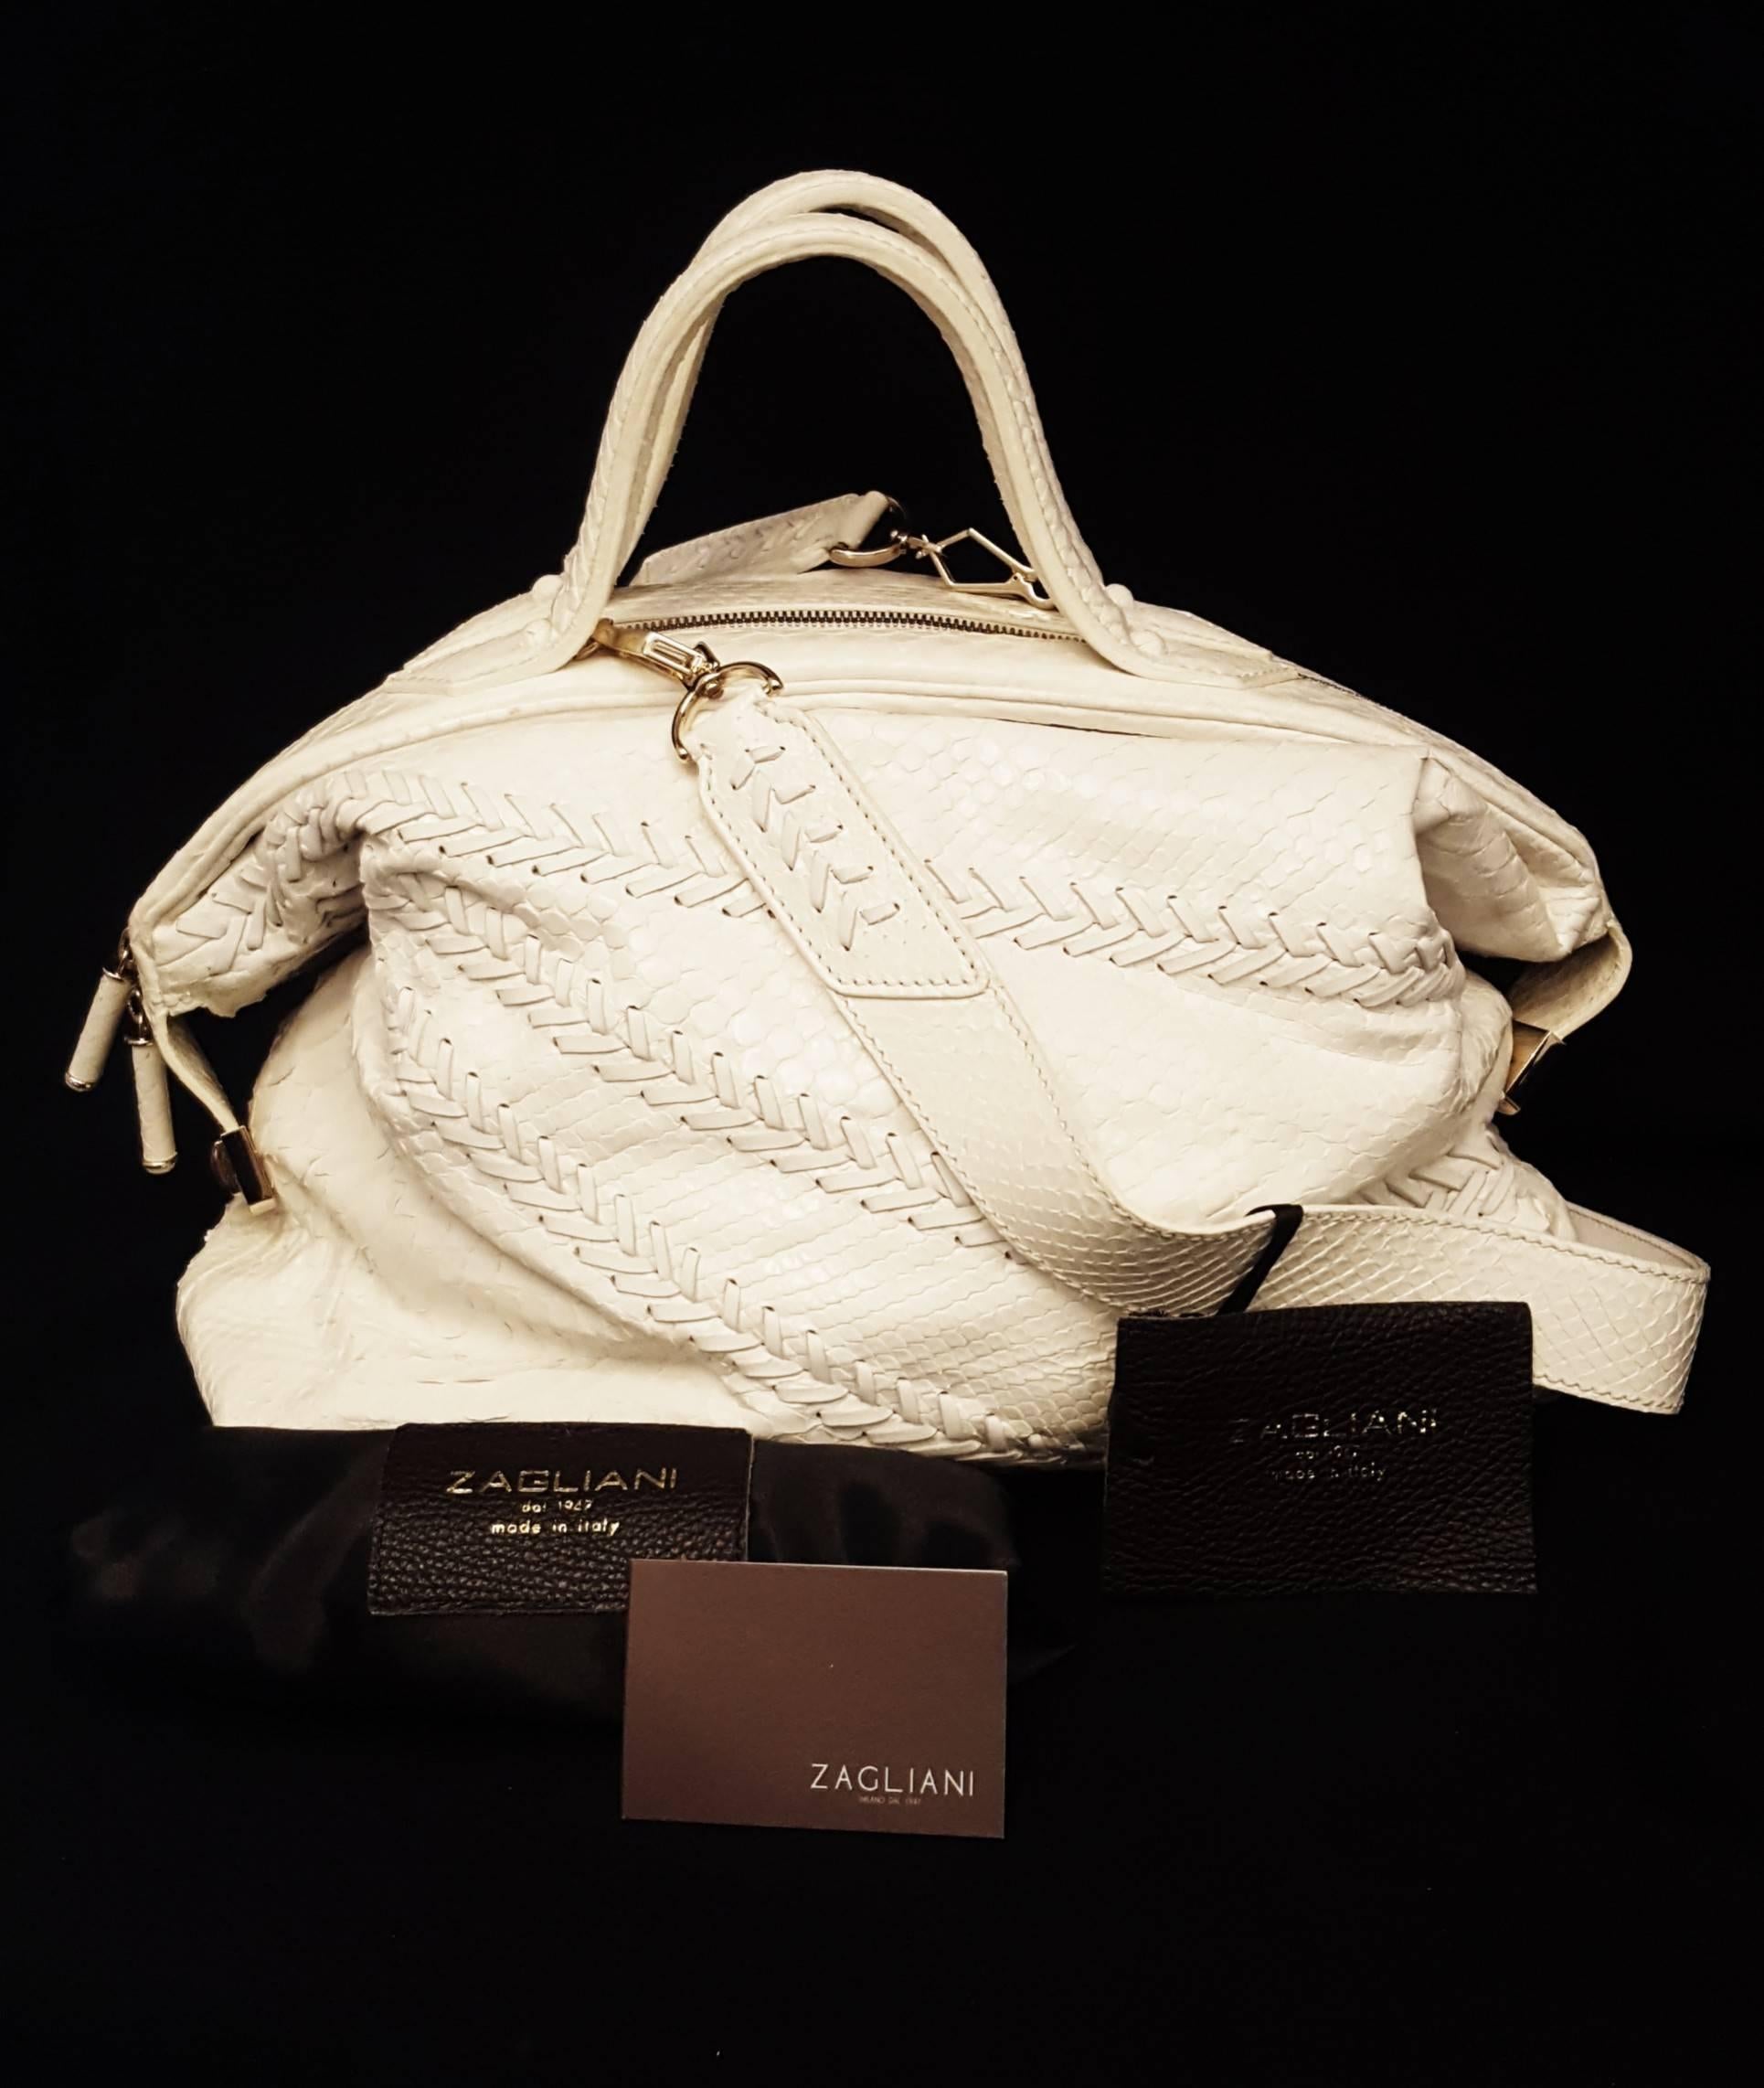 Zagliani ivory large python and leather Puffy bag is crafted by hand.   We rarely get to see a bag as gorgeous as this one. Every feature on it is awe inspiring which makes the piece all the more worthy of being owned. The Zagliani Puffy tote has